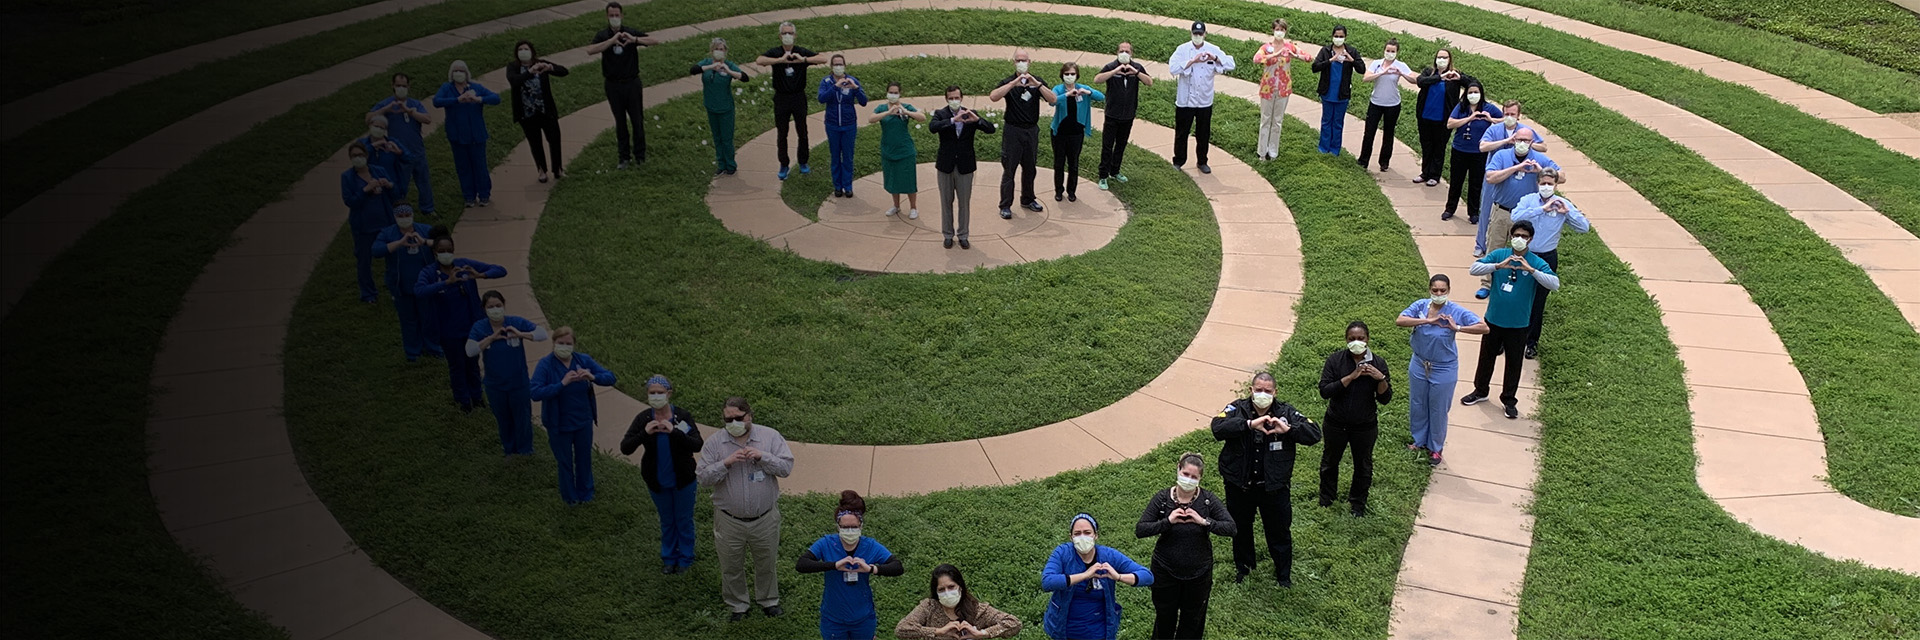 Texas Health Alliance Staff Forming Heart in the Garden